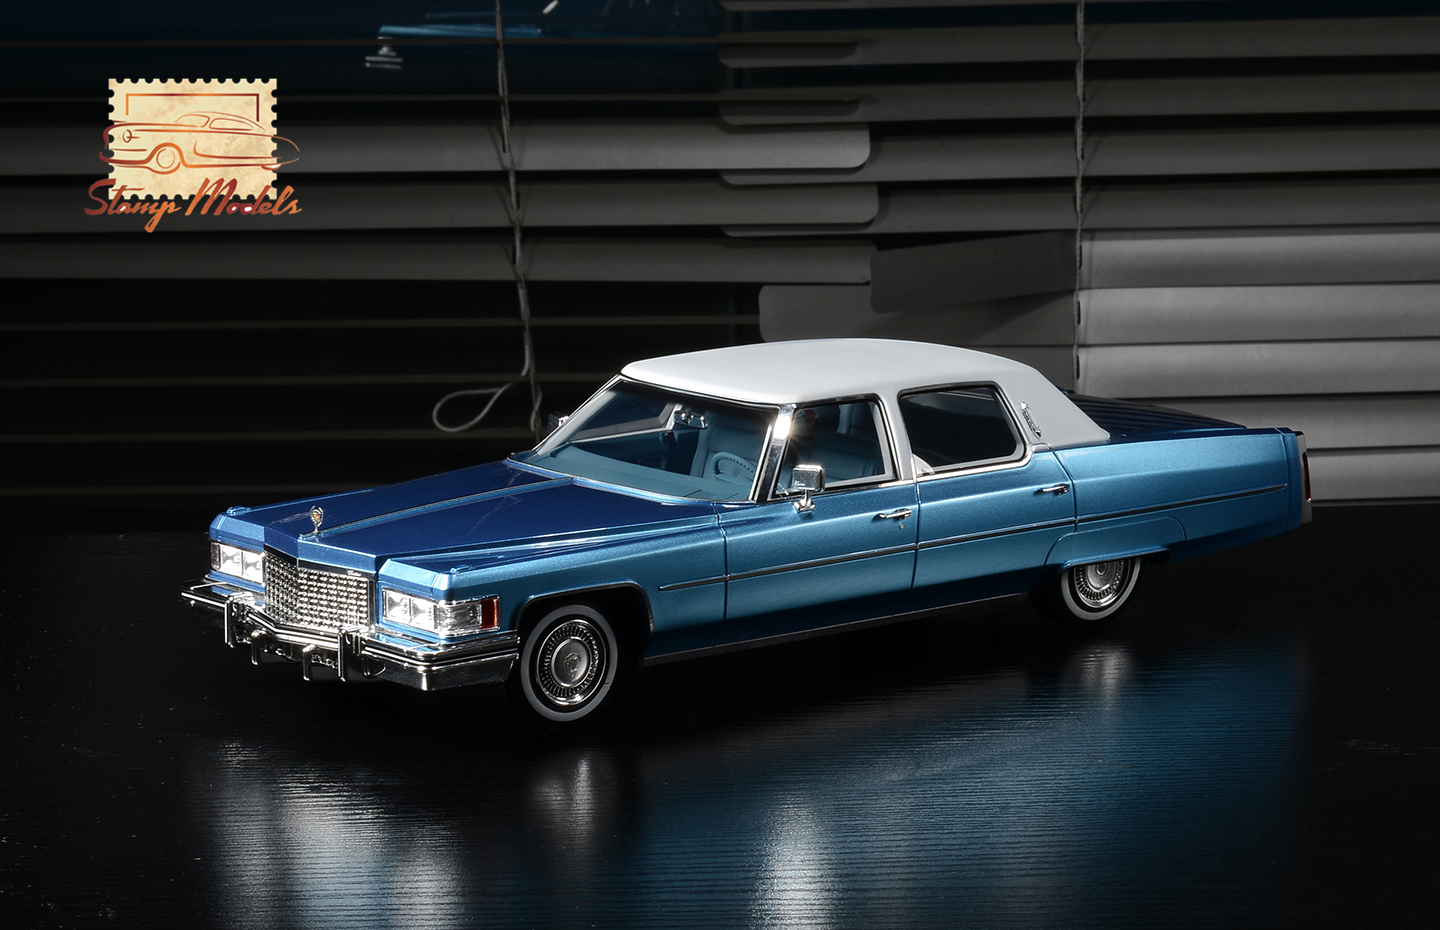 STM1976201 1976 Cadillac Fleetwood Sixty Special Brougham 1/18 Scale